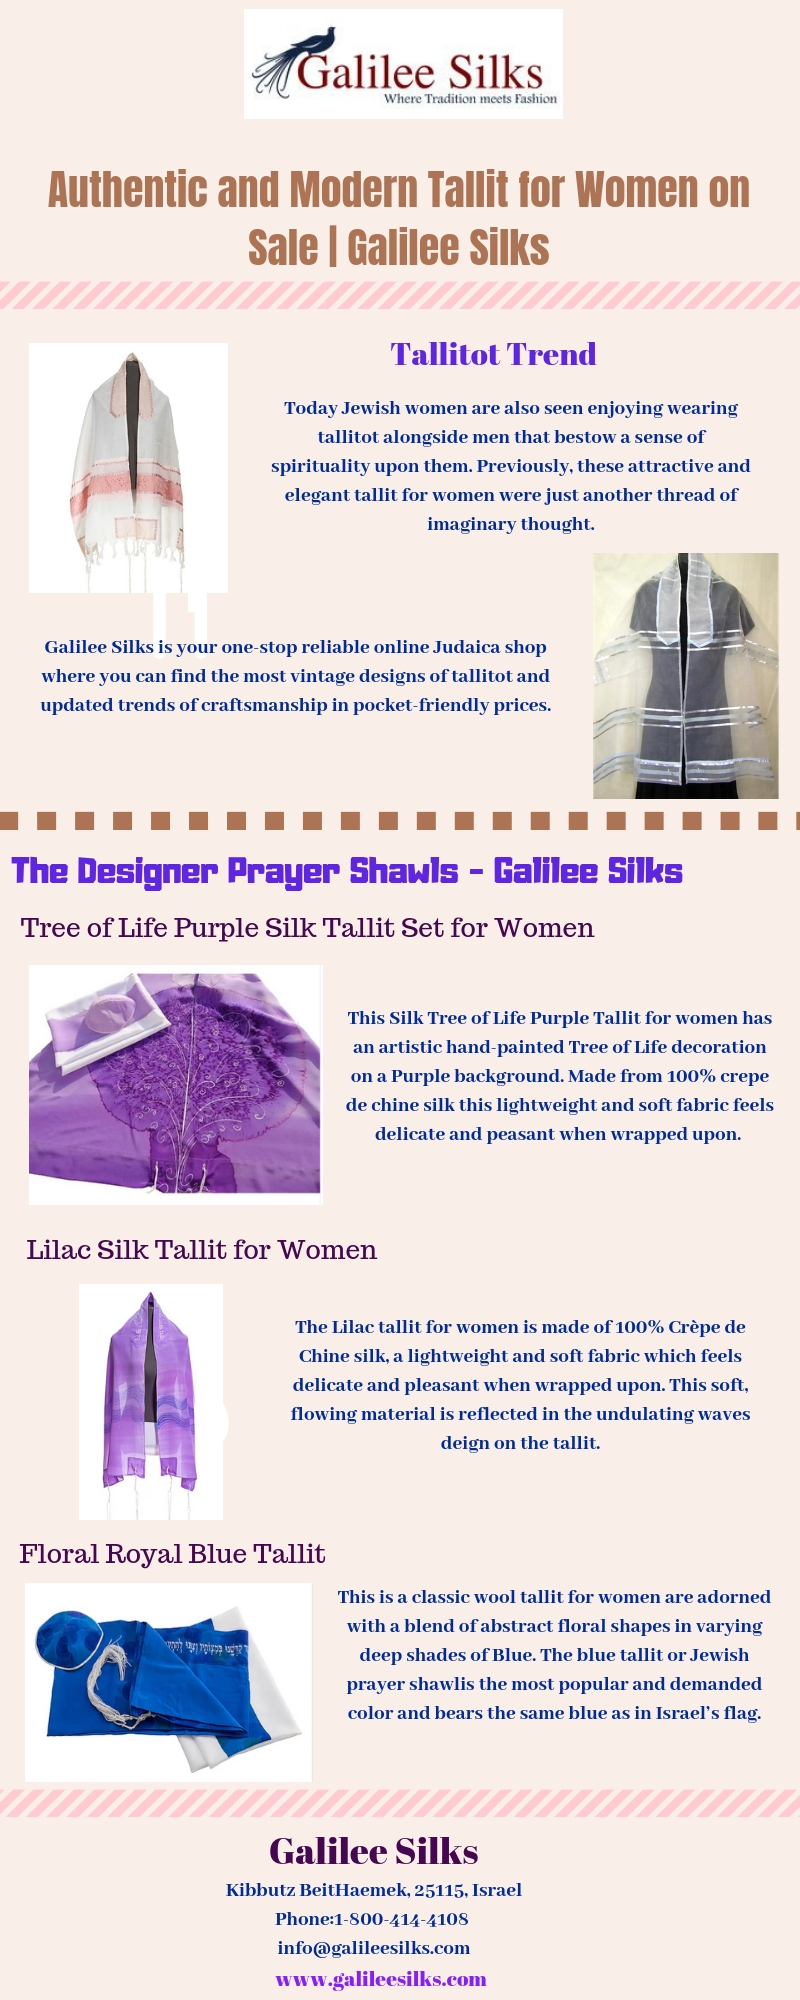 Authentic and Modern Tallit for Women on Sale _ Galilee Silks.jpg Are you looking for a brand new Tallit? Take a look at these modern and authentic Jewish prayer shawls that will last you for a long time. For more details, visit this link: https://bit.ly/2UDdrr3
 by amramrafi